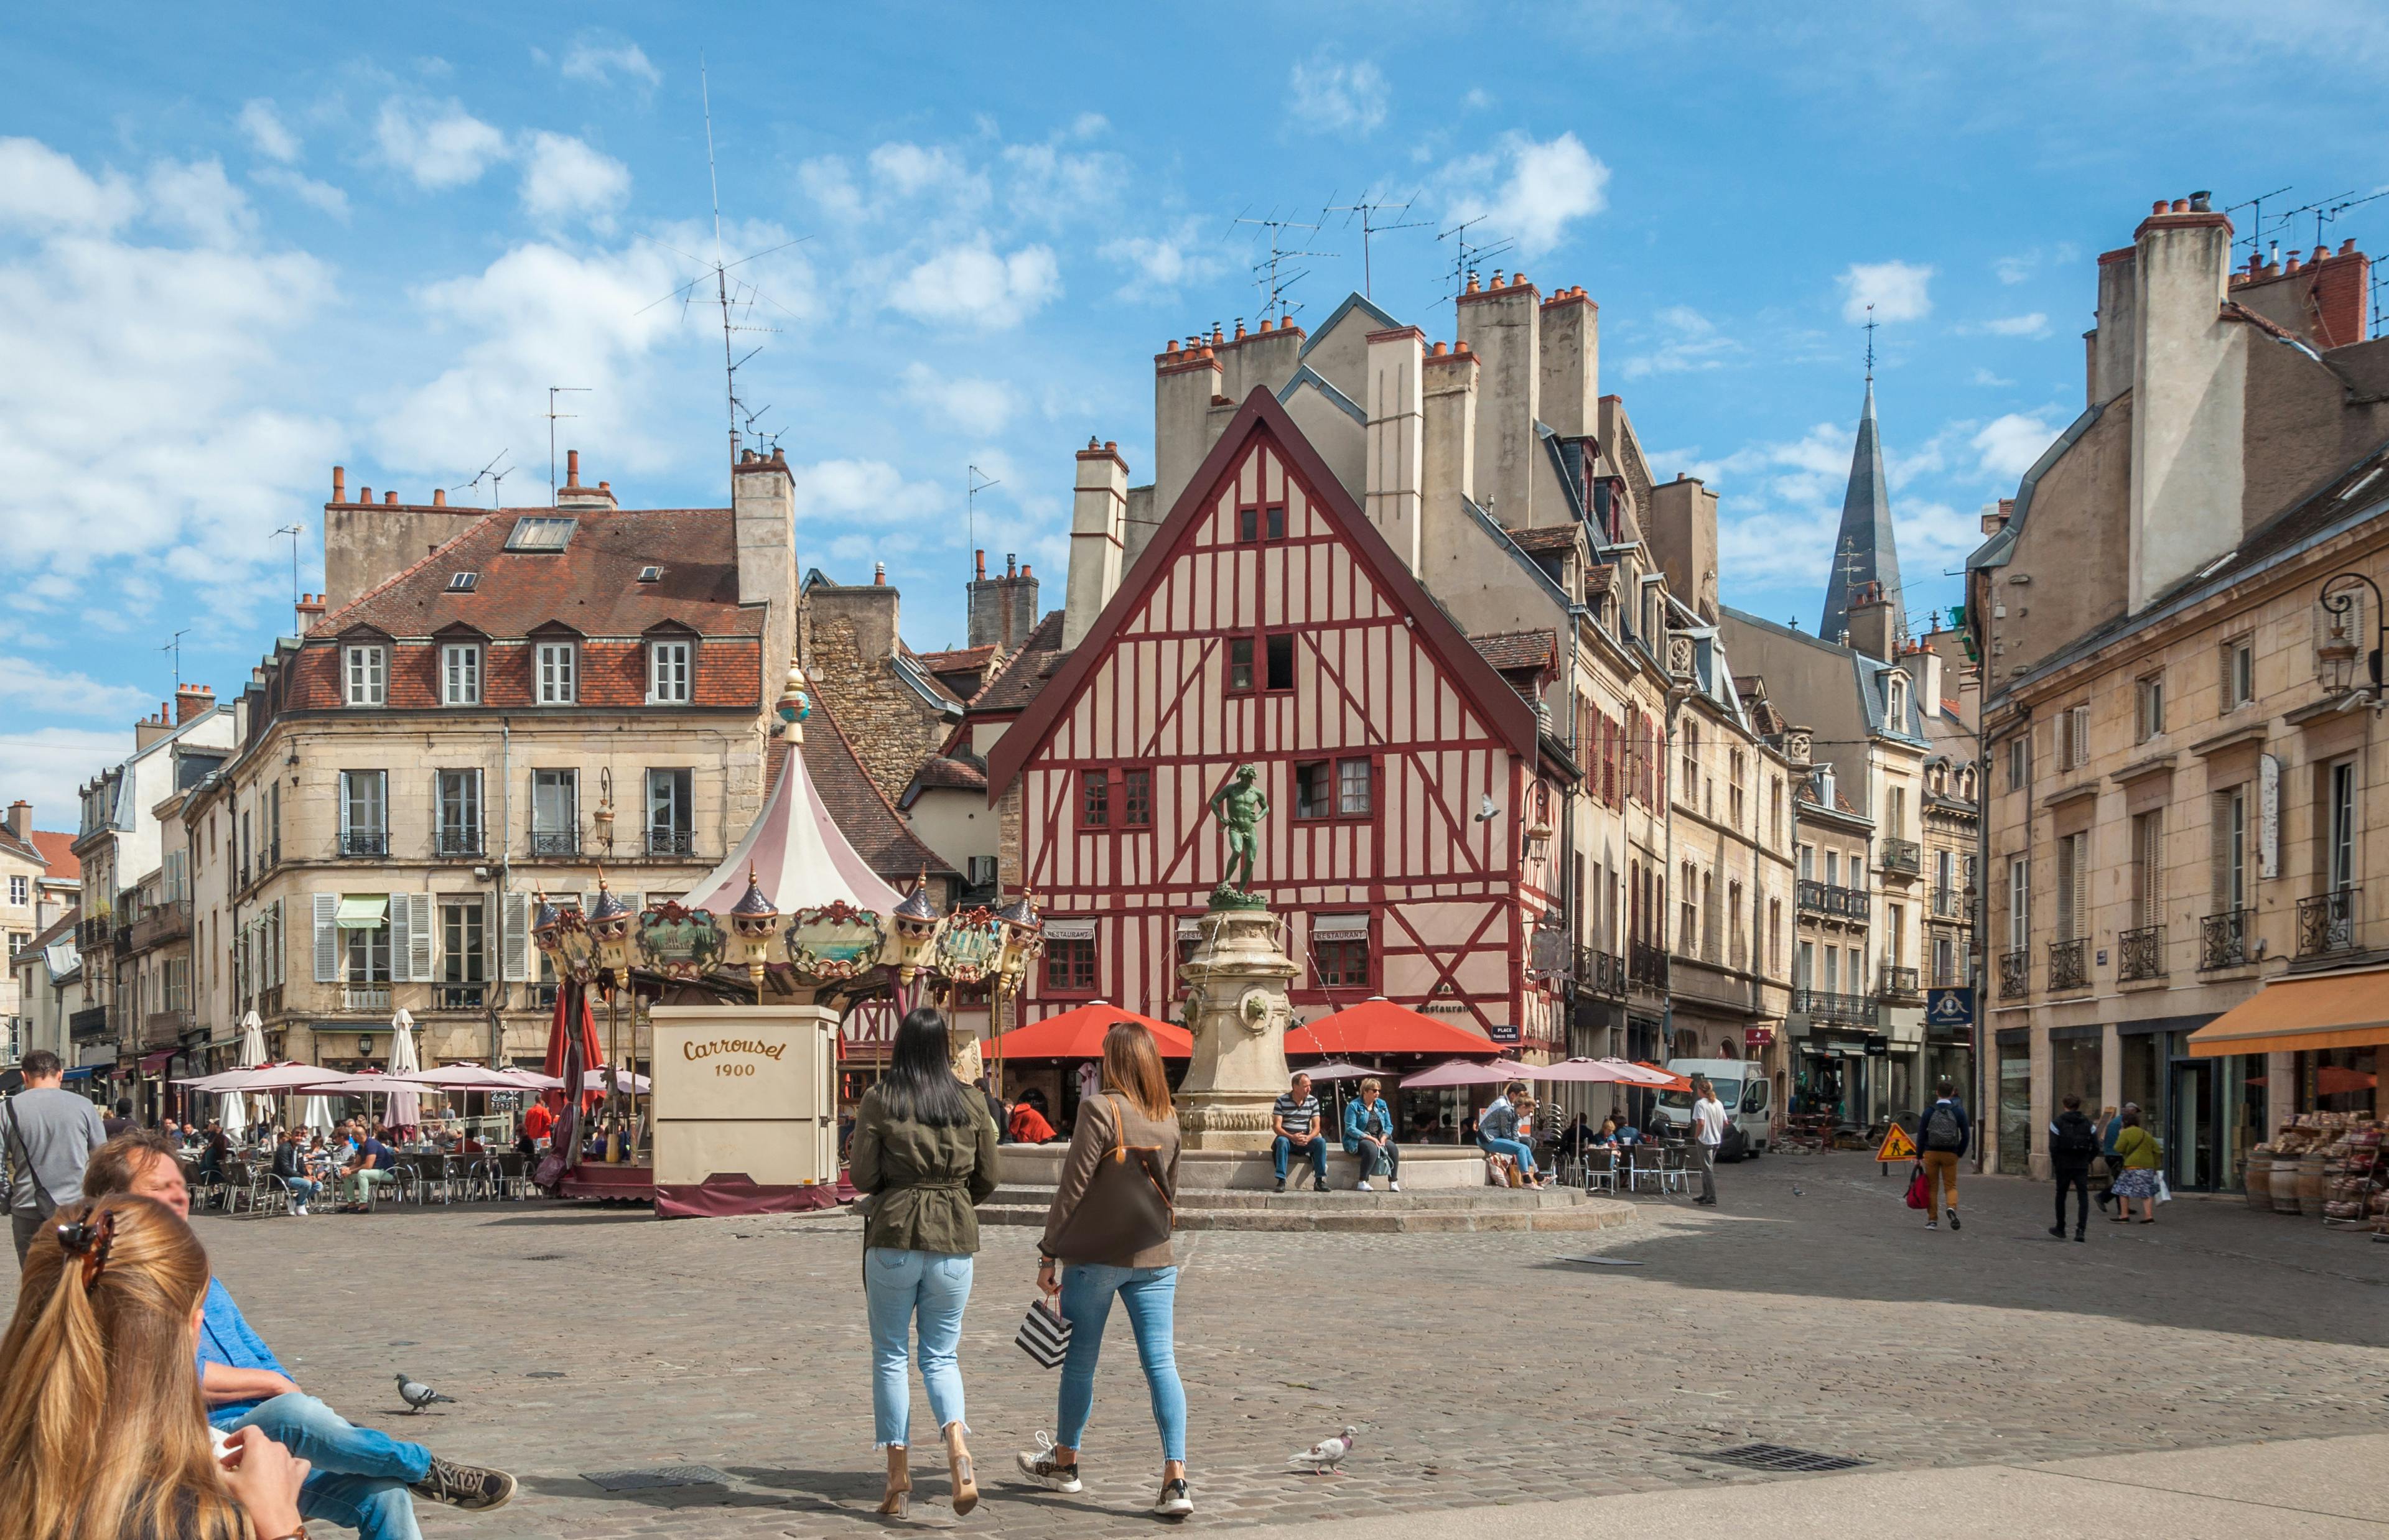 Self guided tour with interactive city game of Dijon